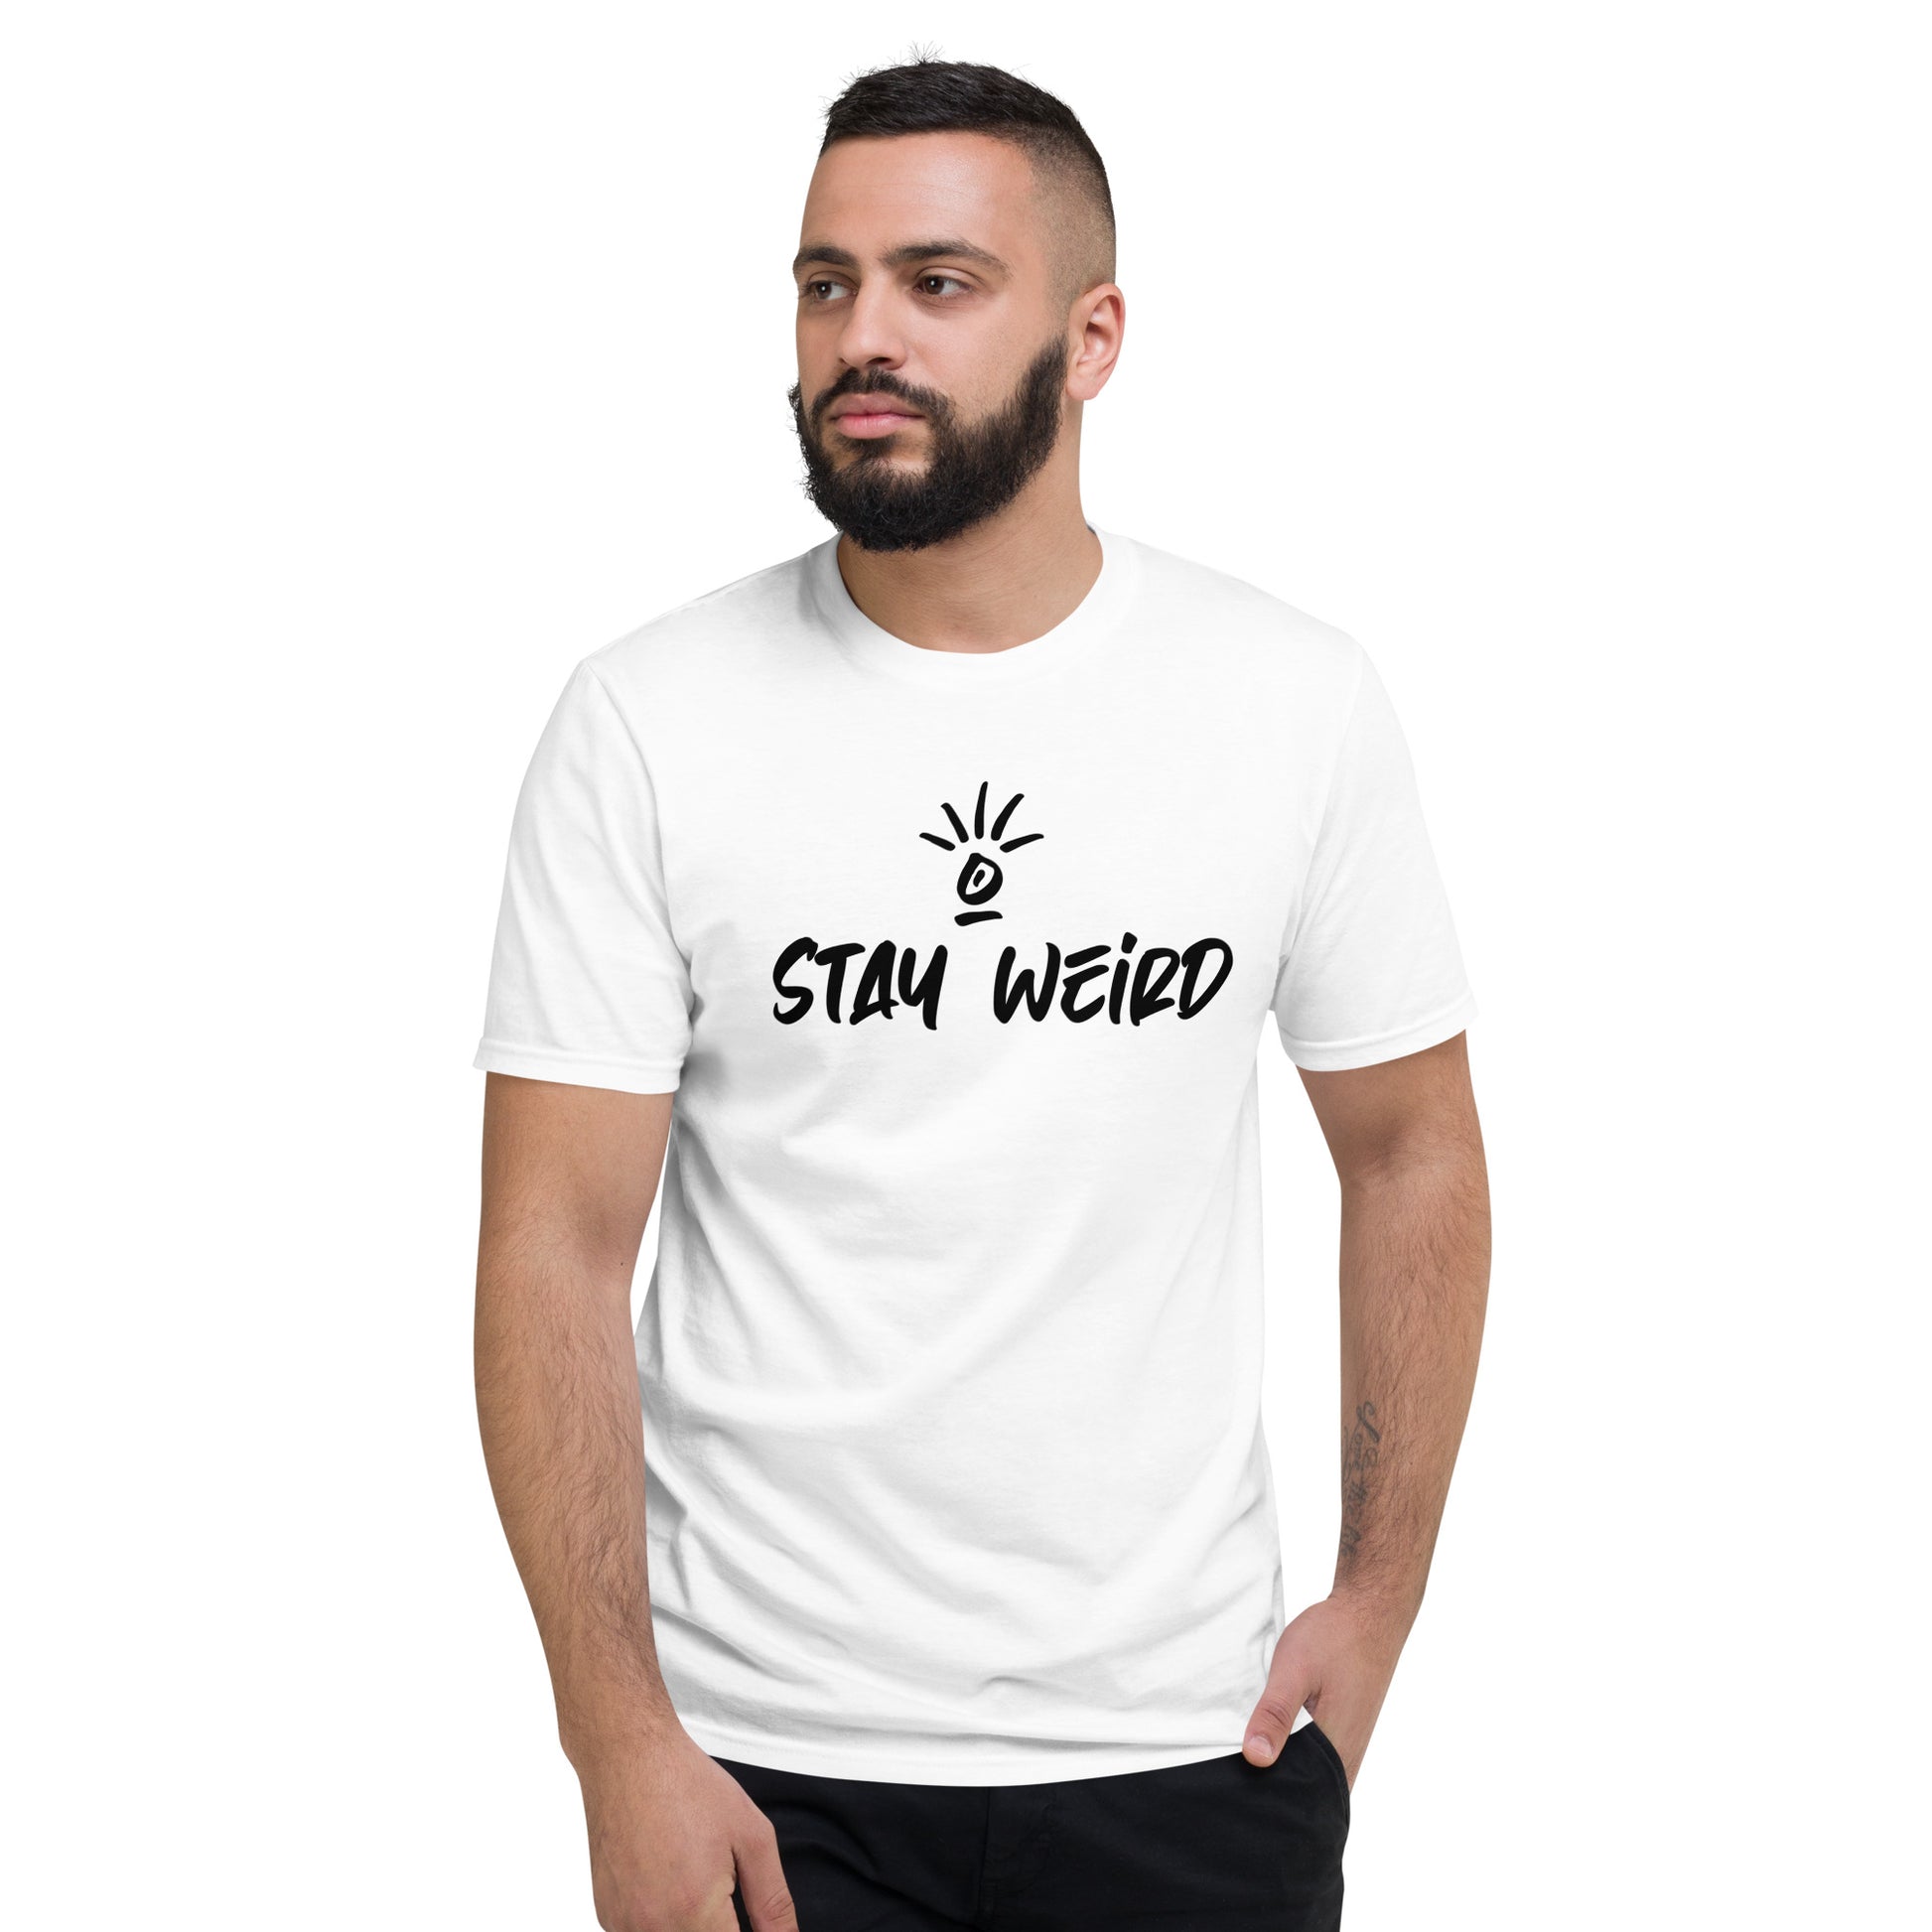 Unisex 'Stay Weird - Tribe of Weirdos' T-shirt showcasing a bold declaration of uniqueness and belonging to a community that values individuality.